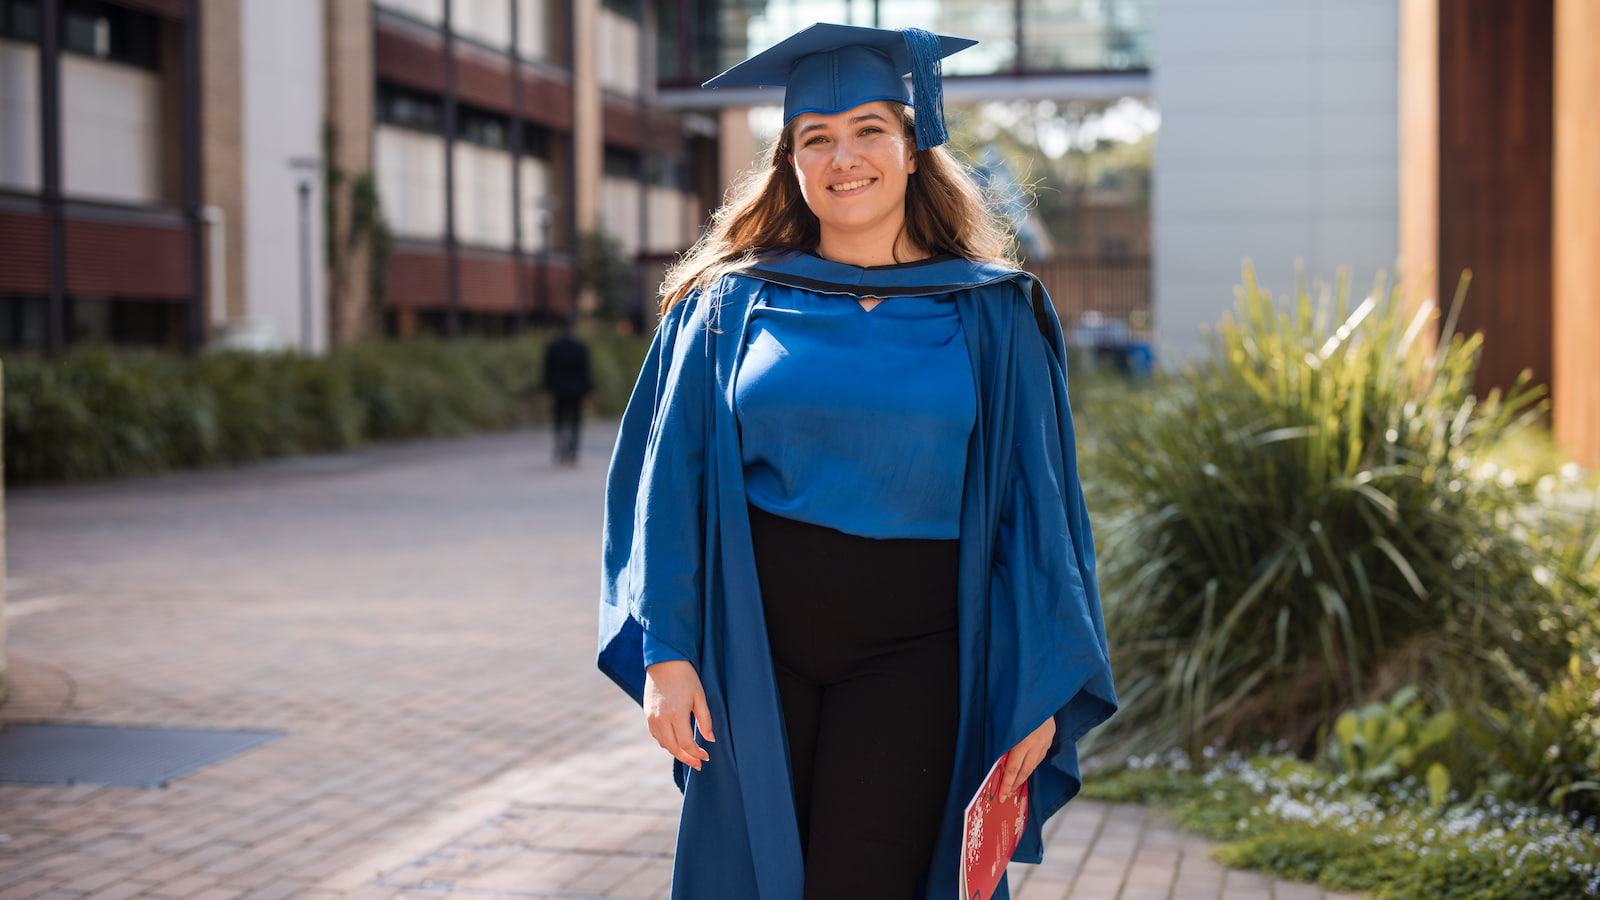 Emma Newman in a blue graduation gown in a full length image. Photo: Michael Gray